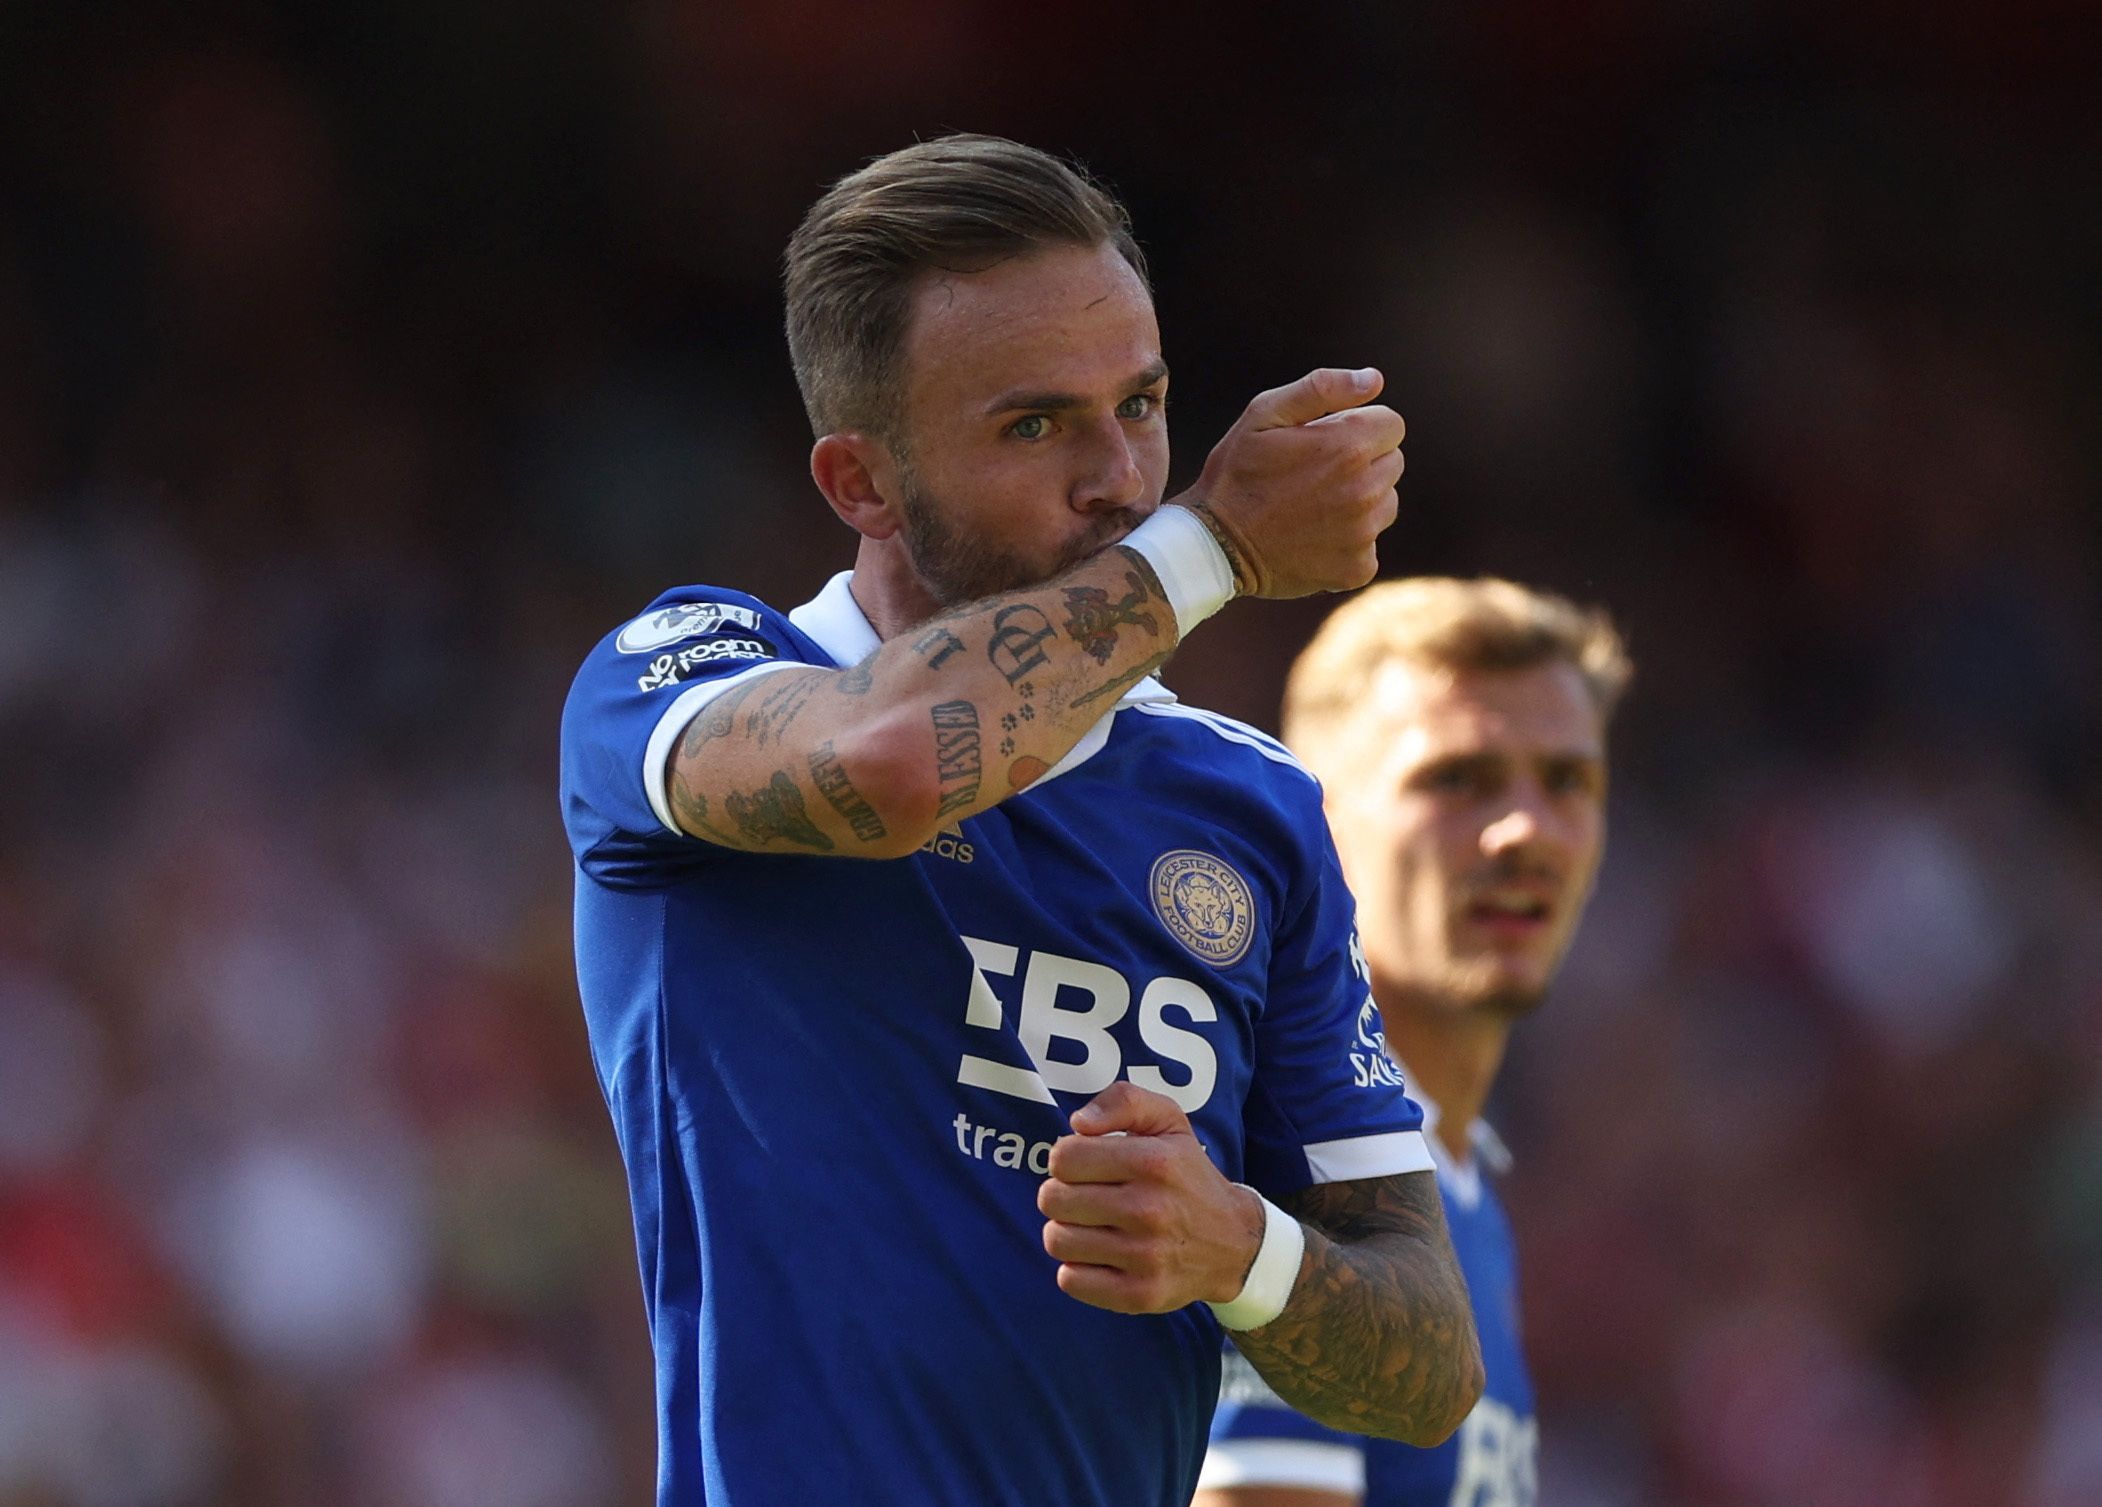 Newcastle United: Transfer expert reveals exciting Maddison and Tielemans news -Newcastle United News